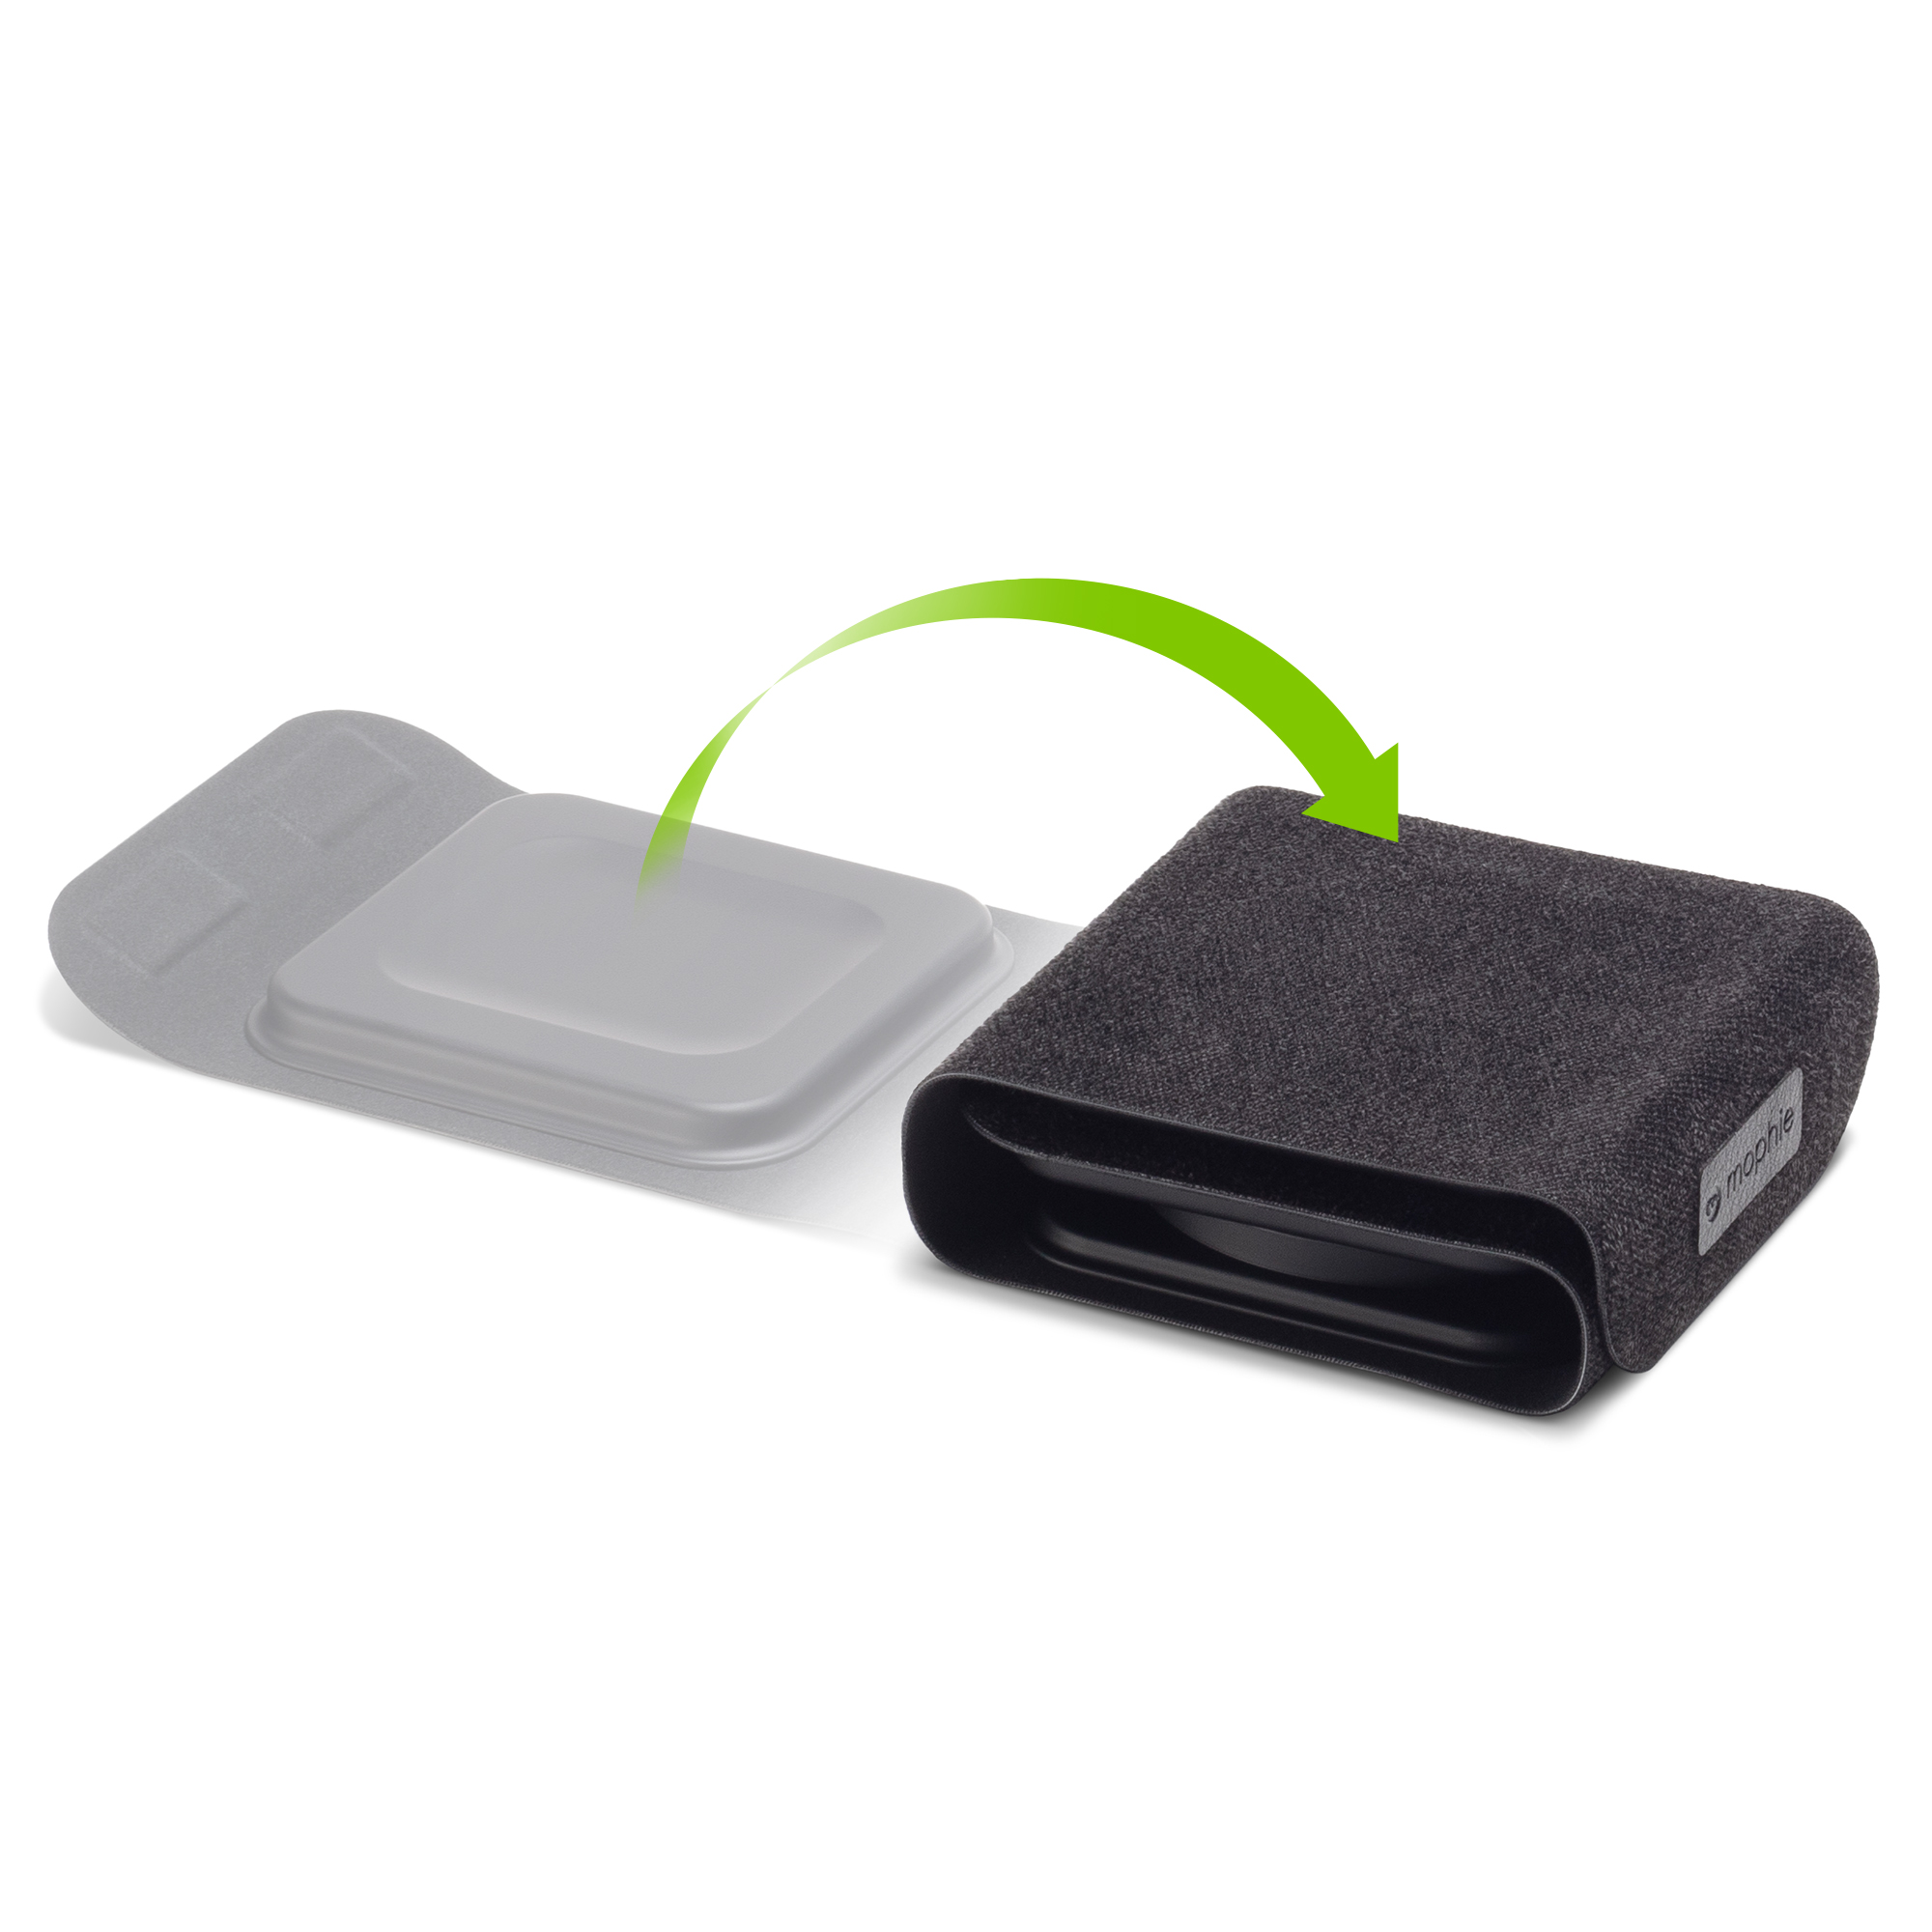 Travel Case with Organized Interior|| The zippered carrying case has an AirTag pocket and extra space for cables.